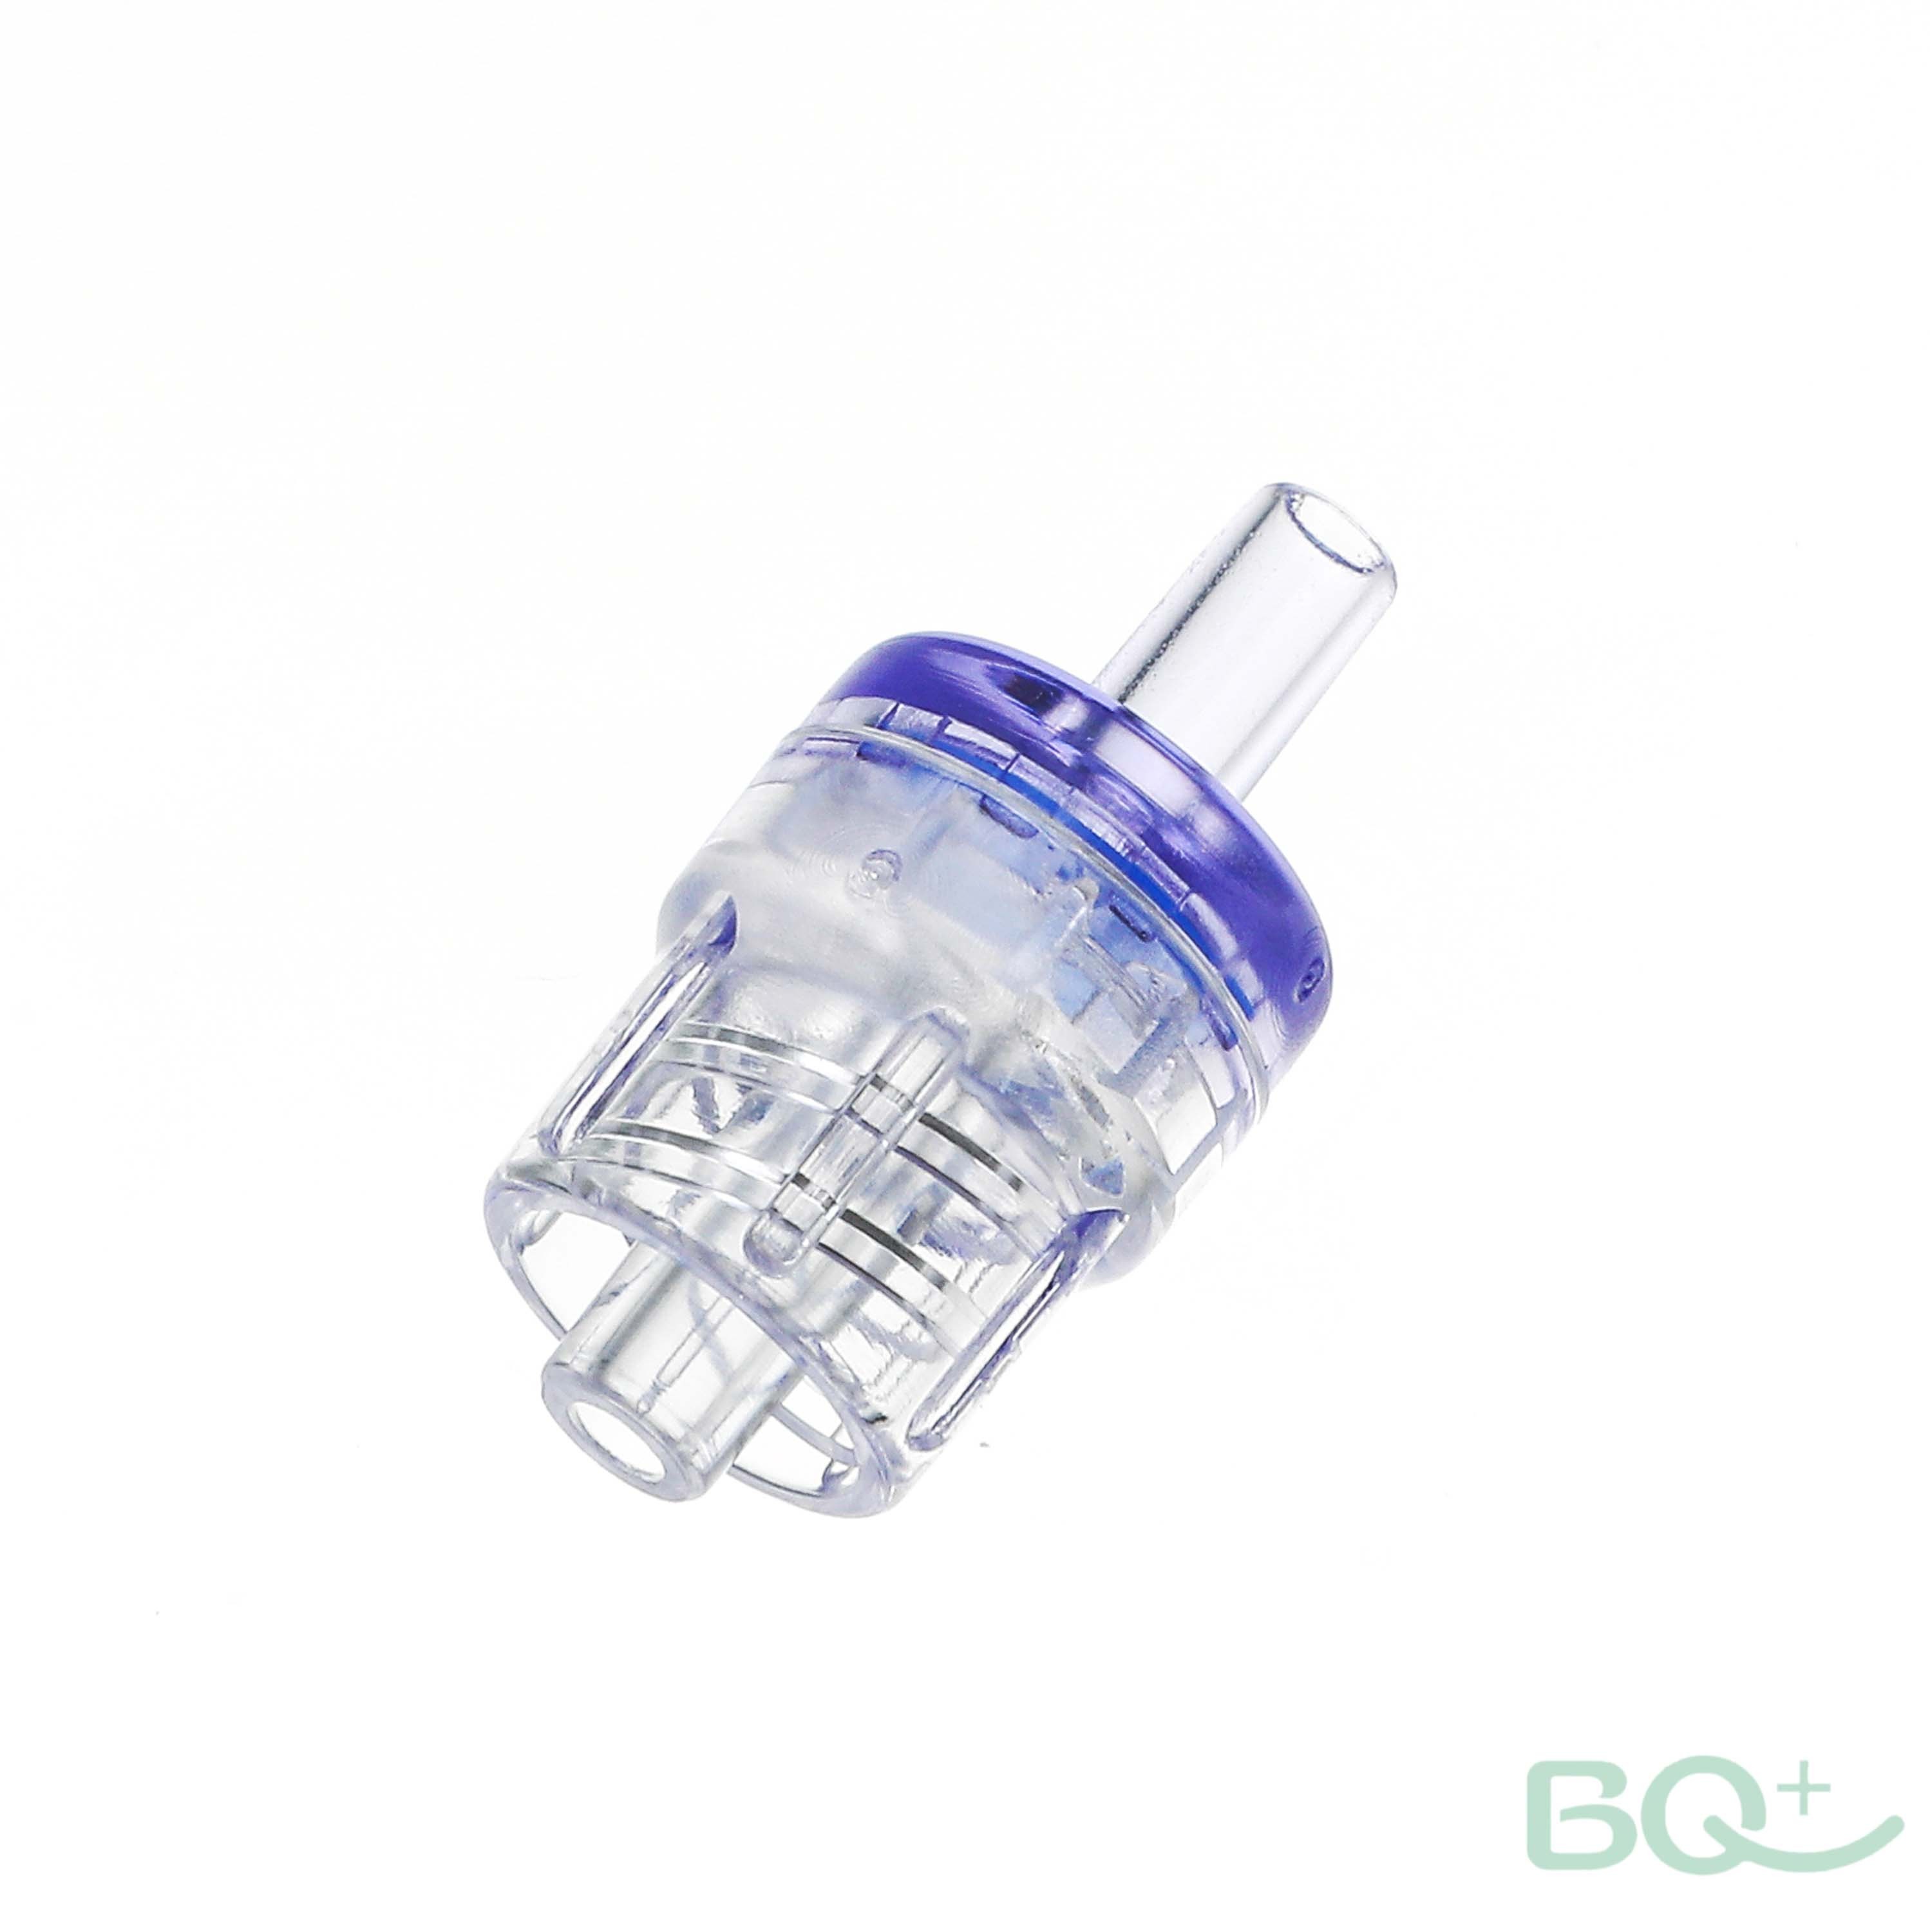 BQ + infusion, infusion, tumor and enteral feeding kit anesthesia